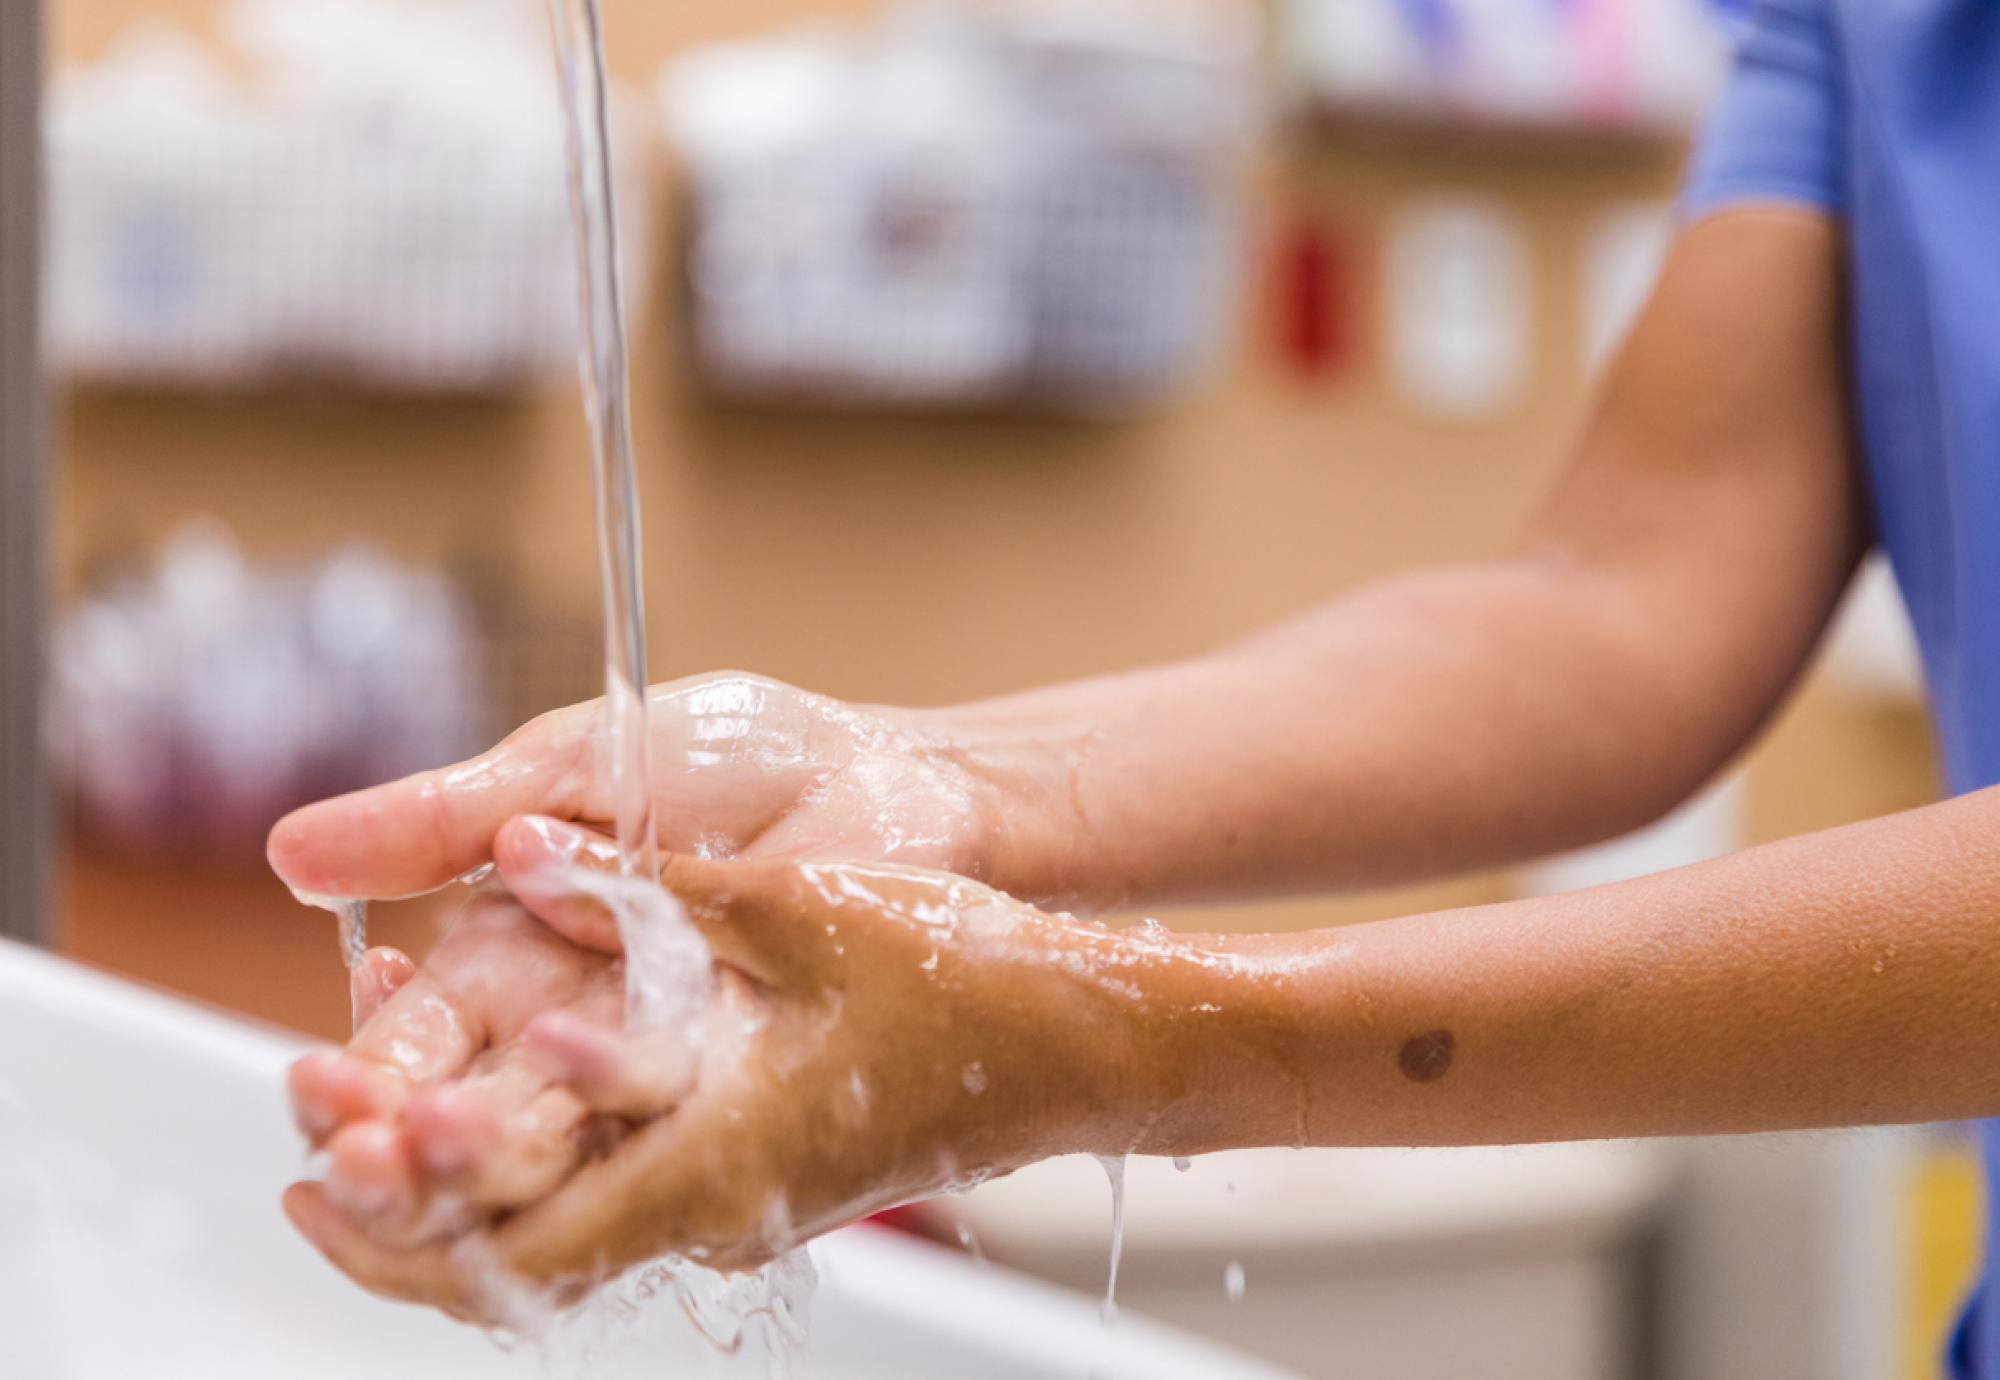 Healthcare worker washing their hands with water